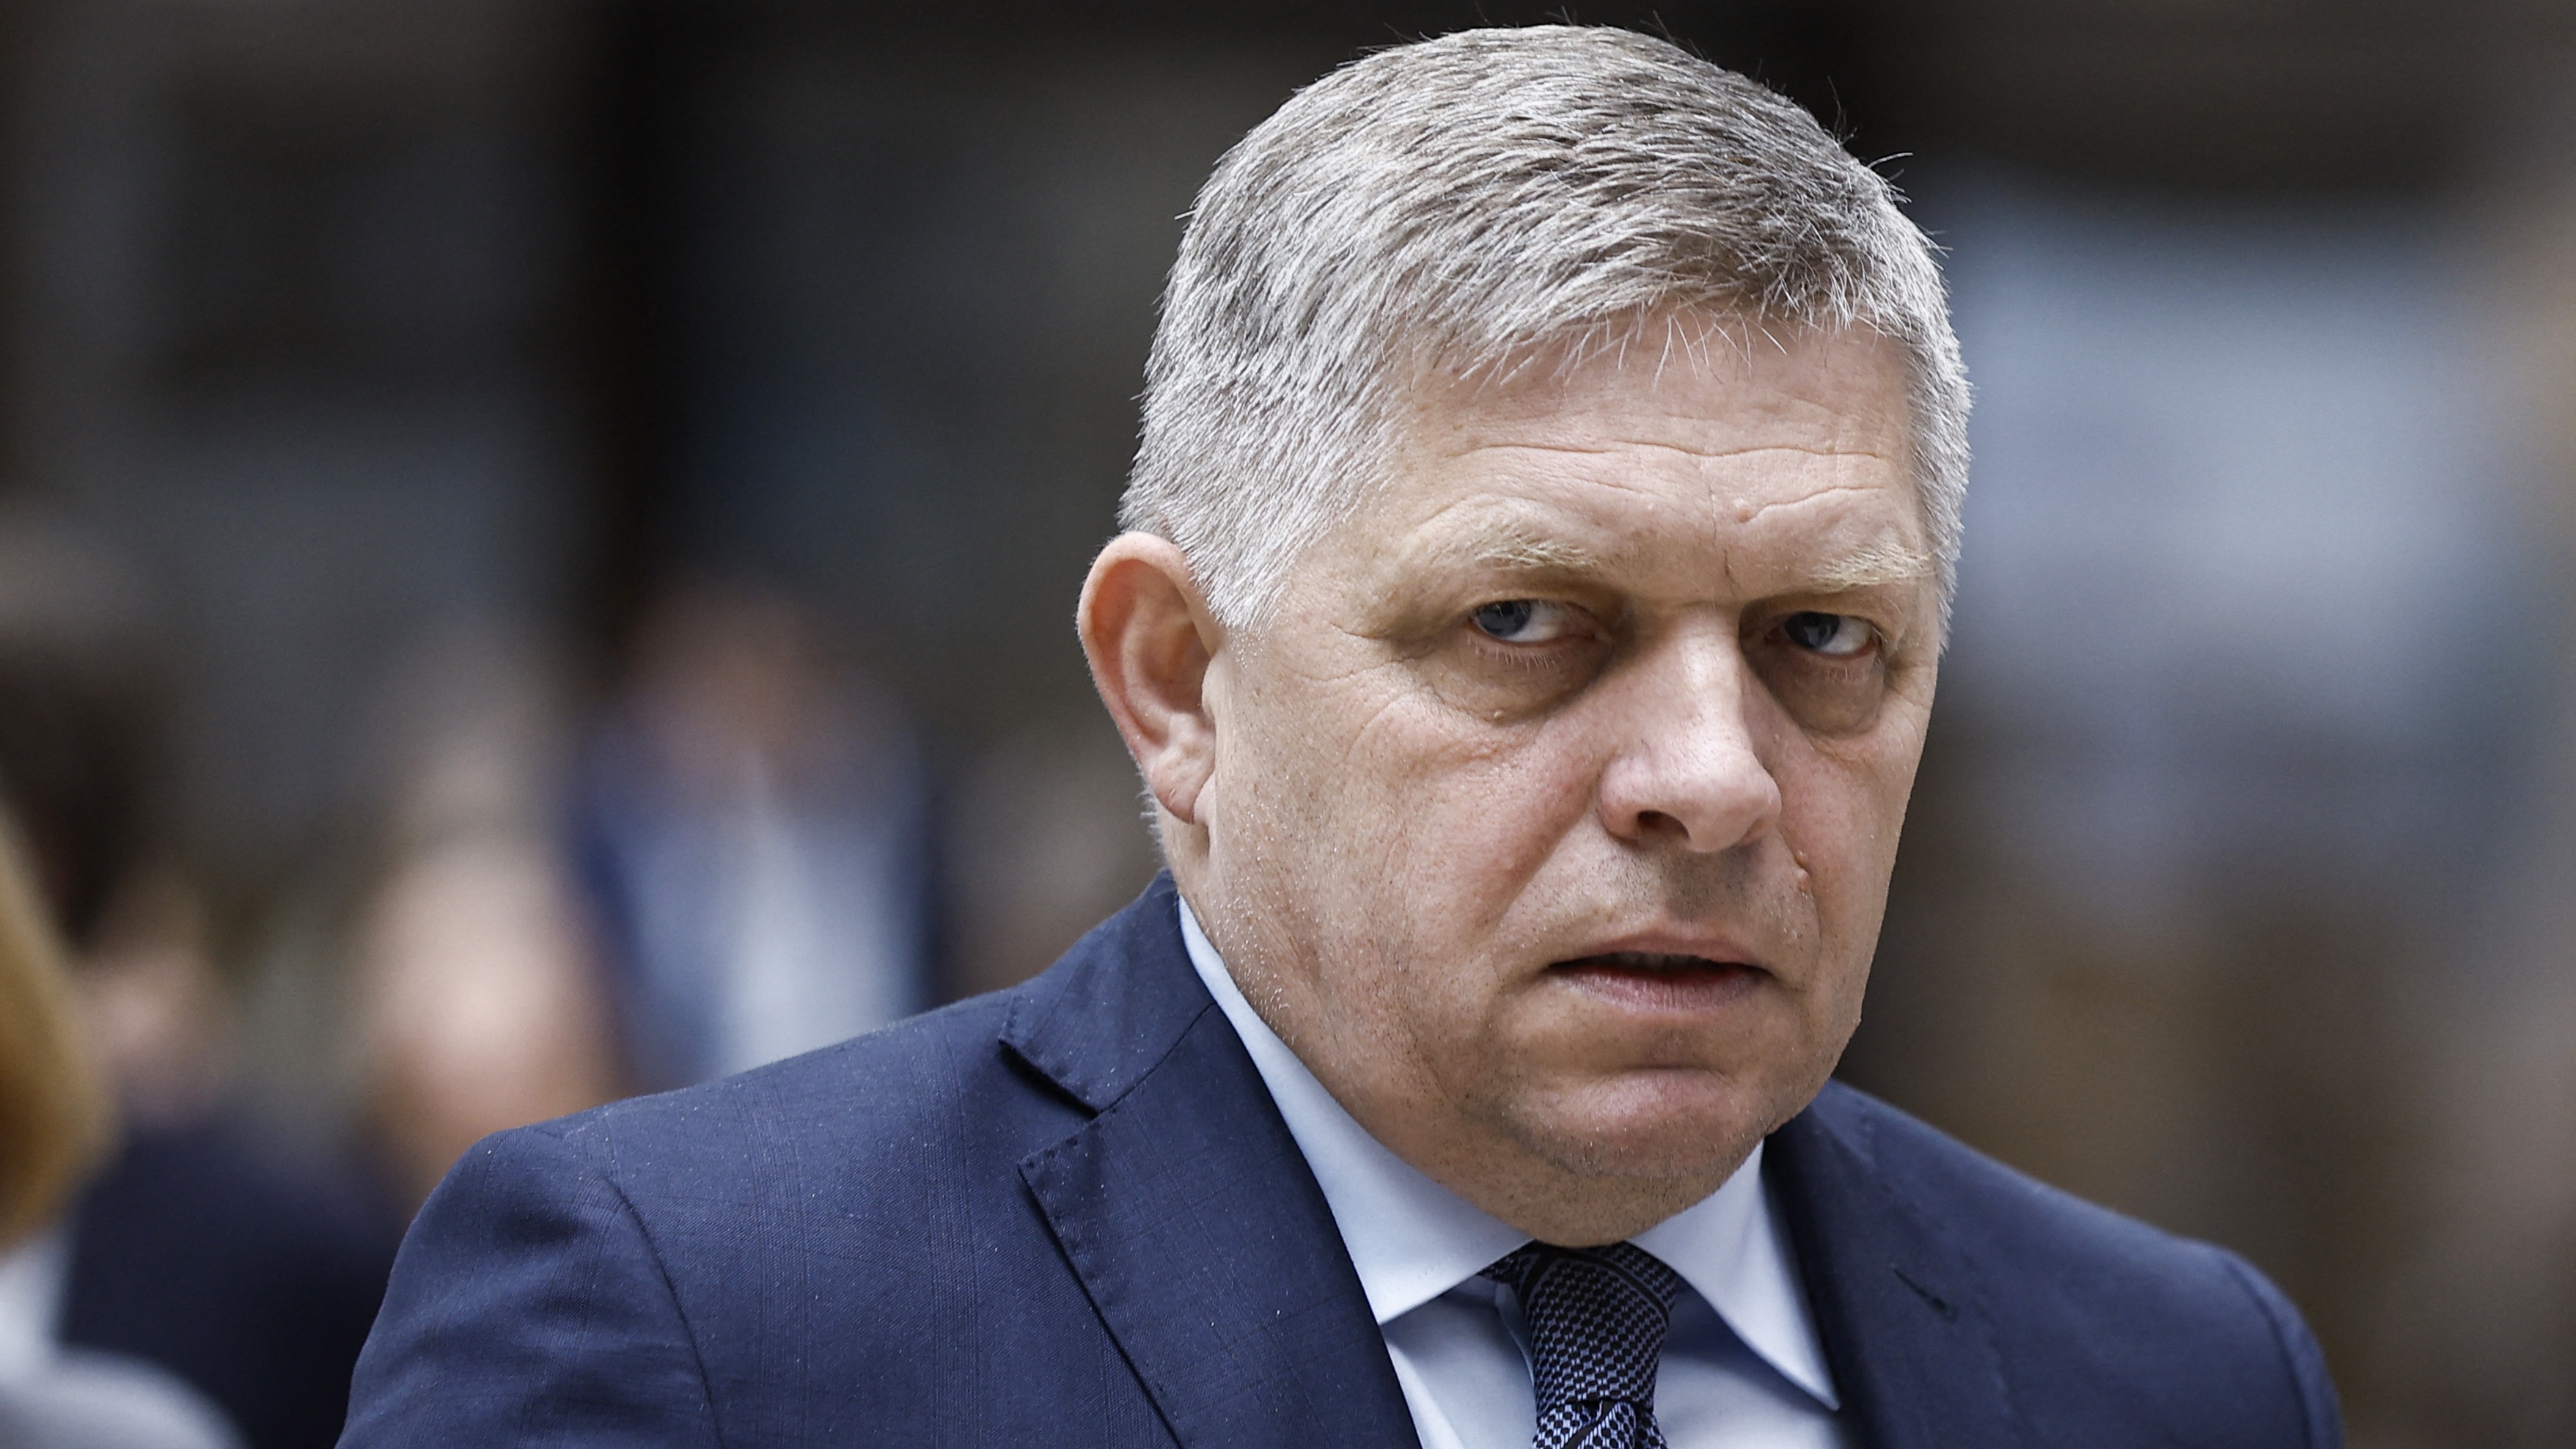 Fico assassination attempt reveals deep divisions in Slovakia